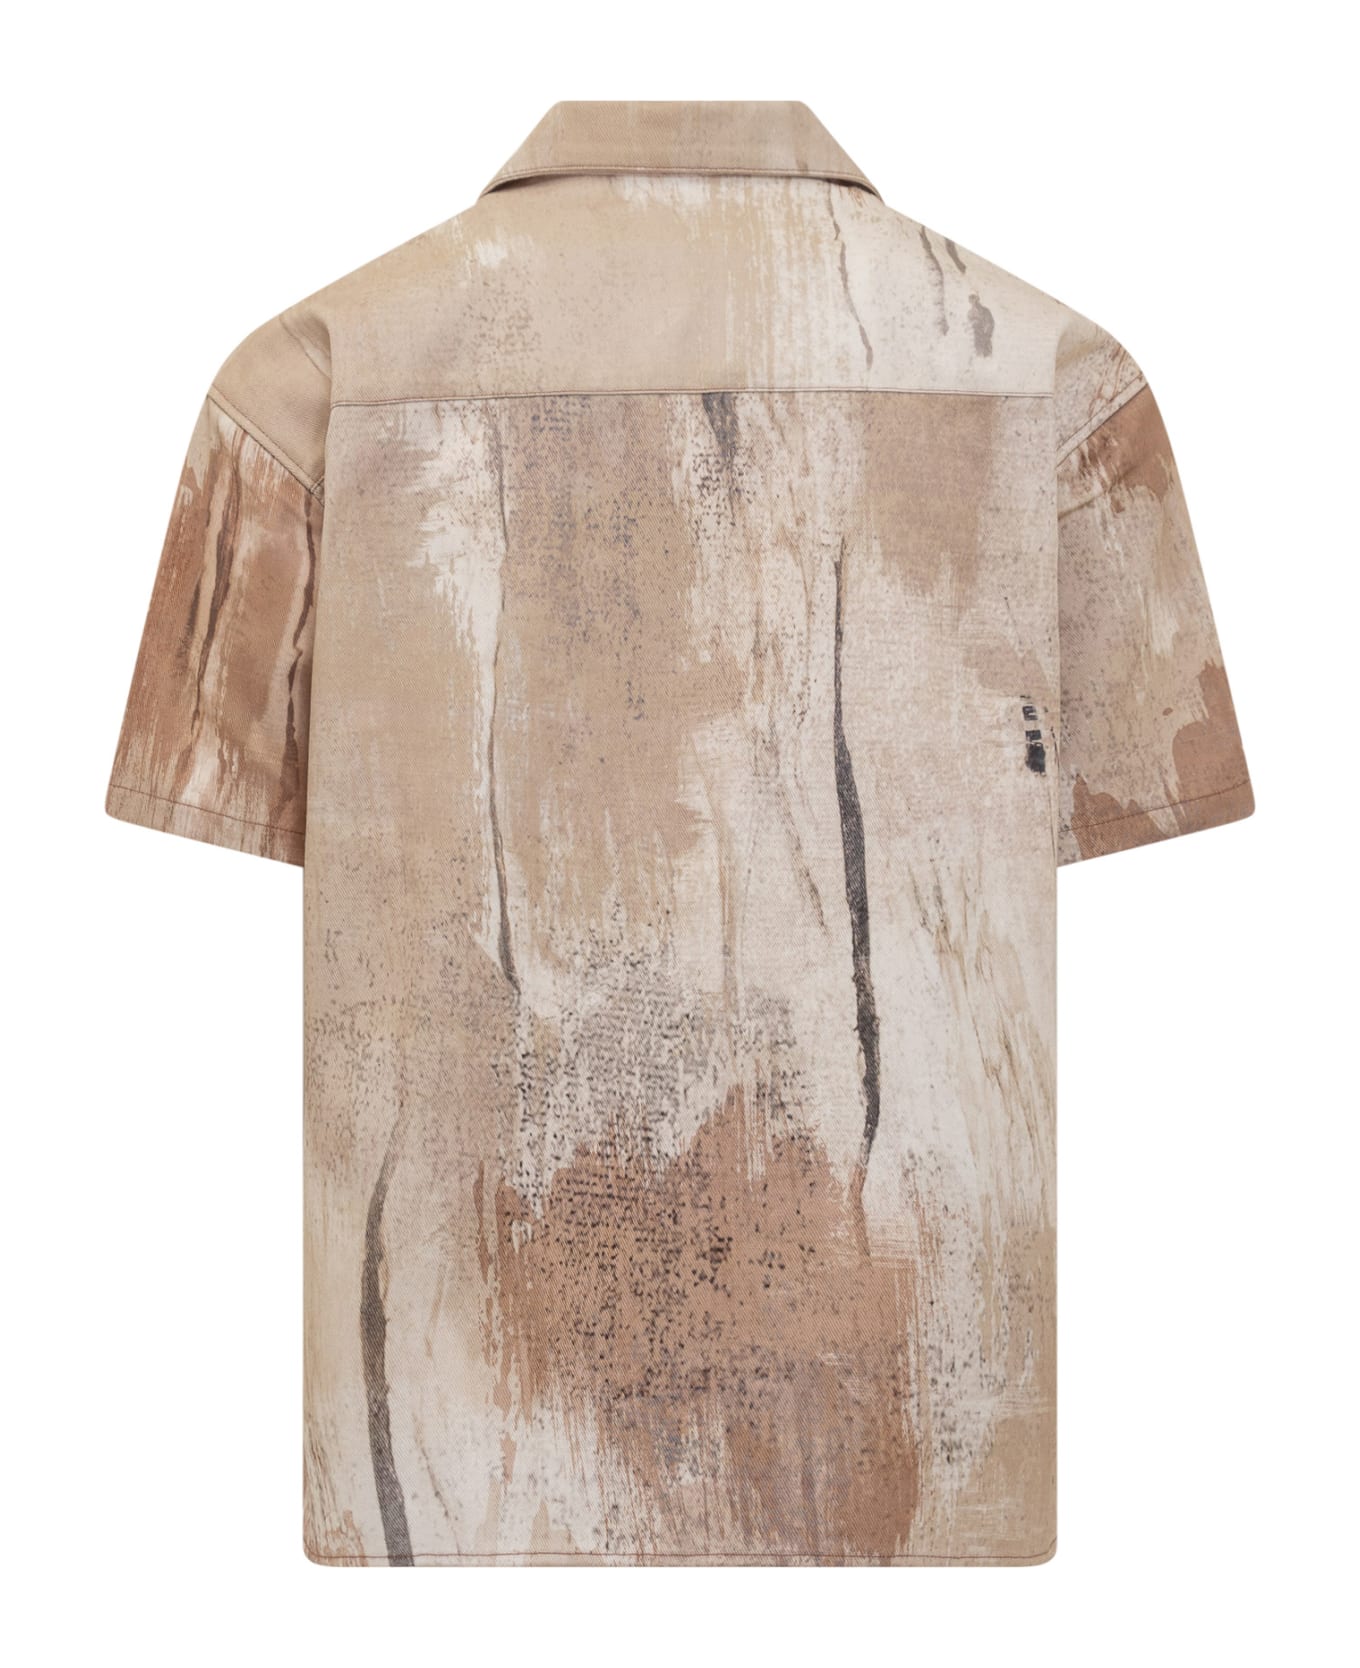 Andersson Bell Tie Dye Shirt - SAND